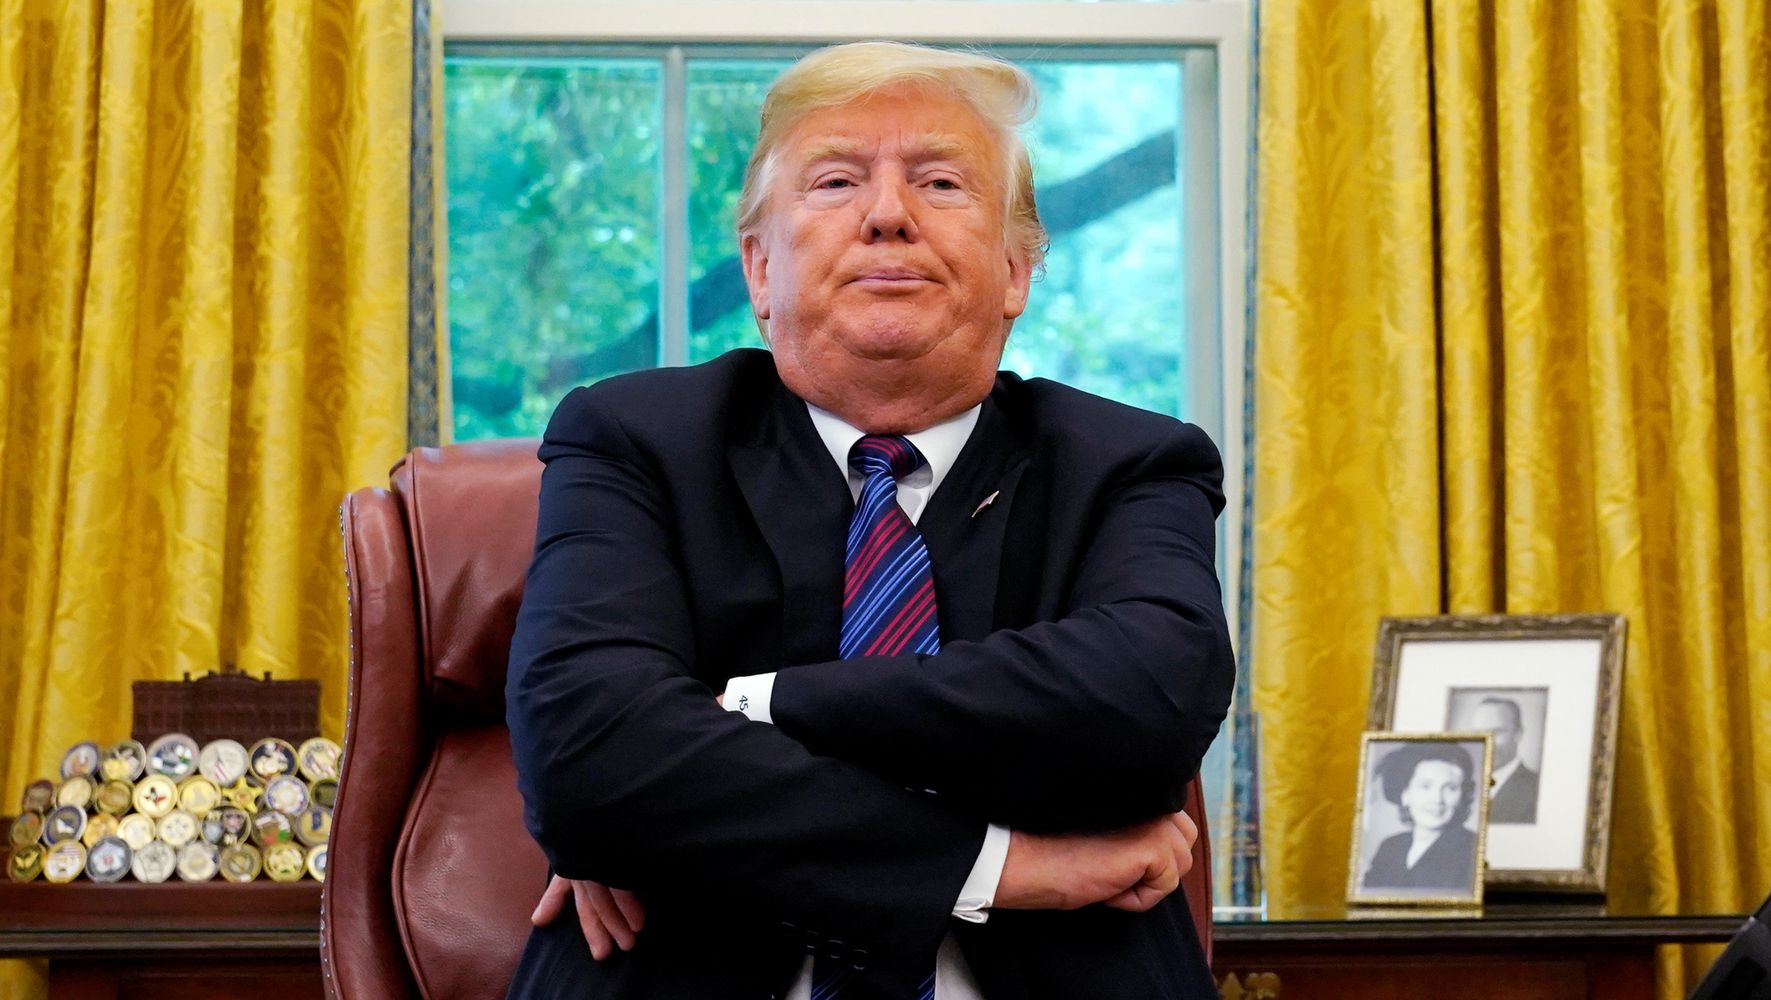 Donald Trump's Weird Oval Office Pose Sparks Hilarious 'Photoshop Battle' |  HuffPost